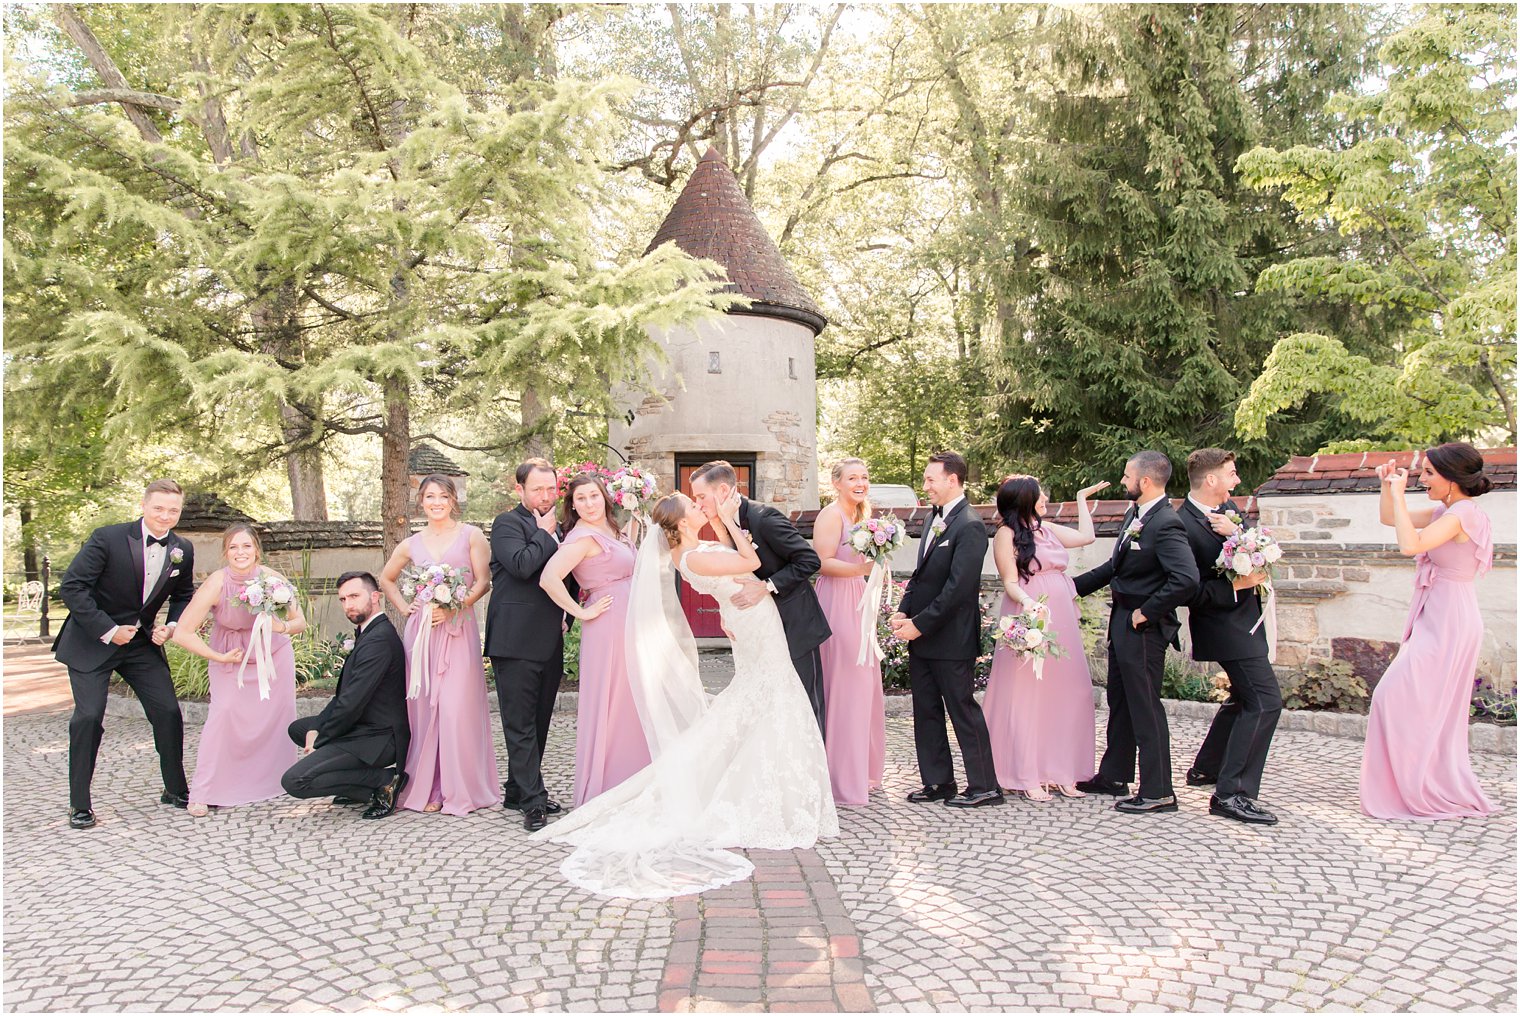 fun bridal party photo at Pleasantdale Chateau